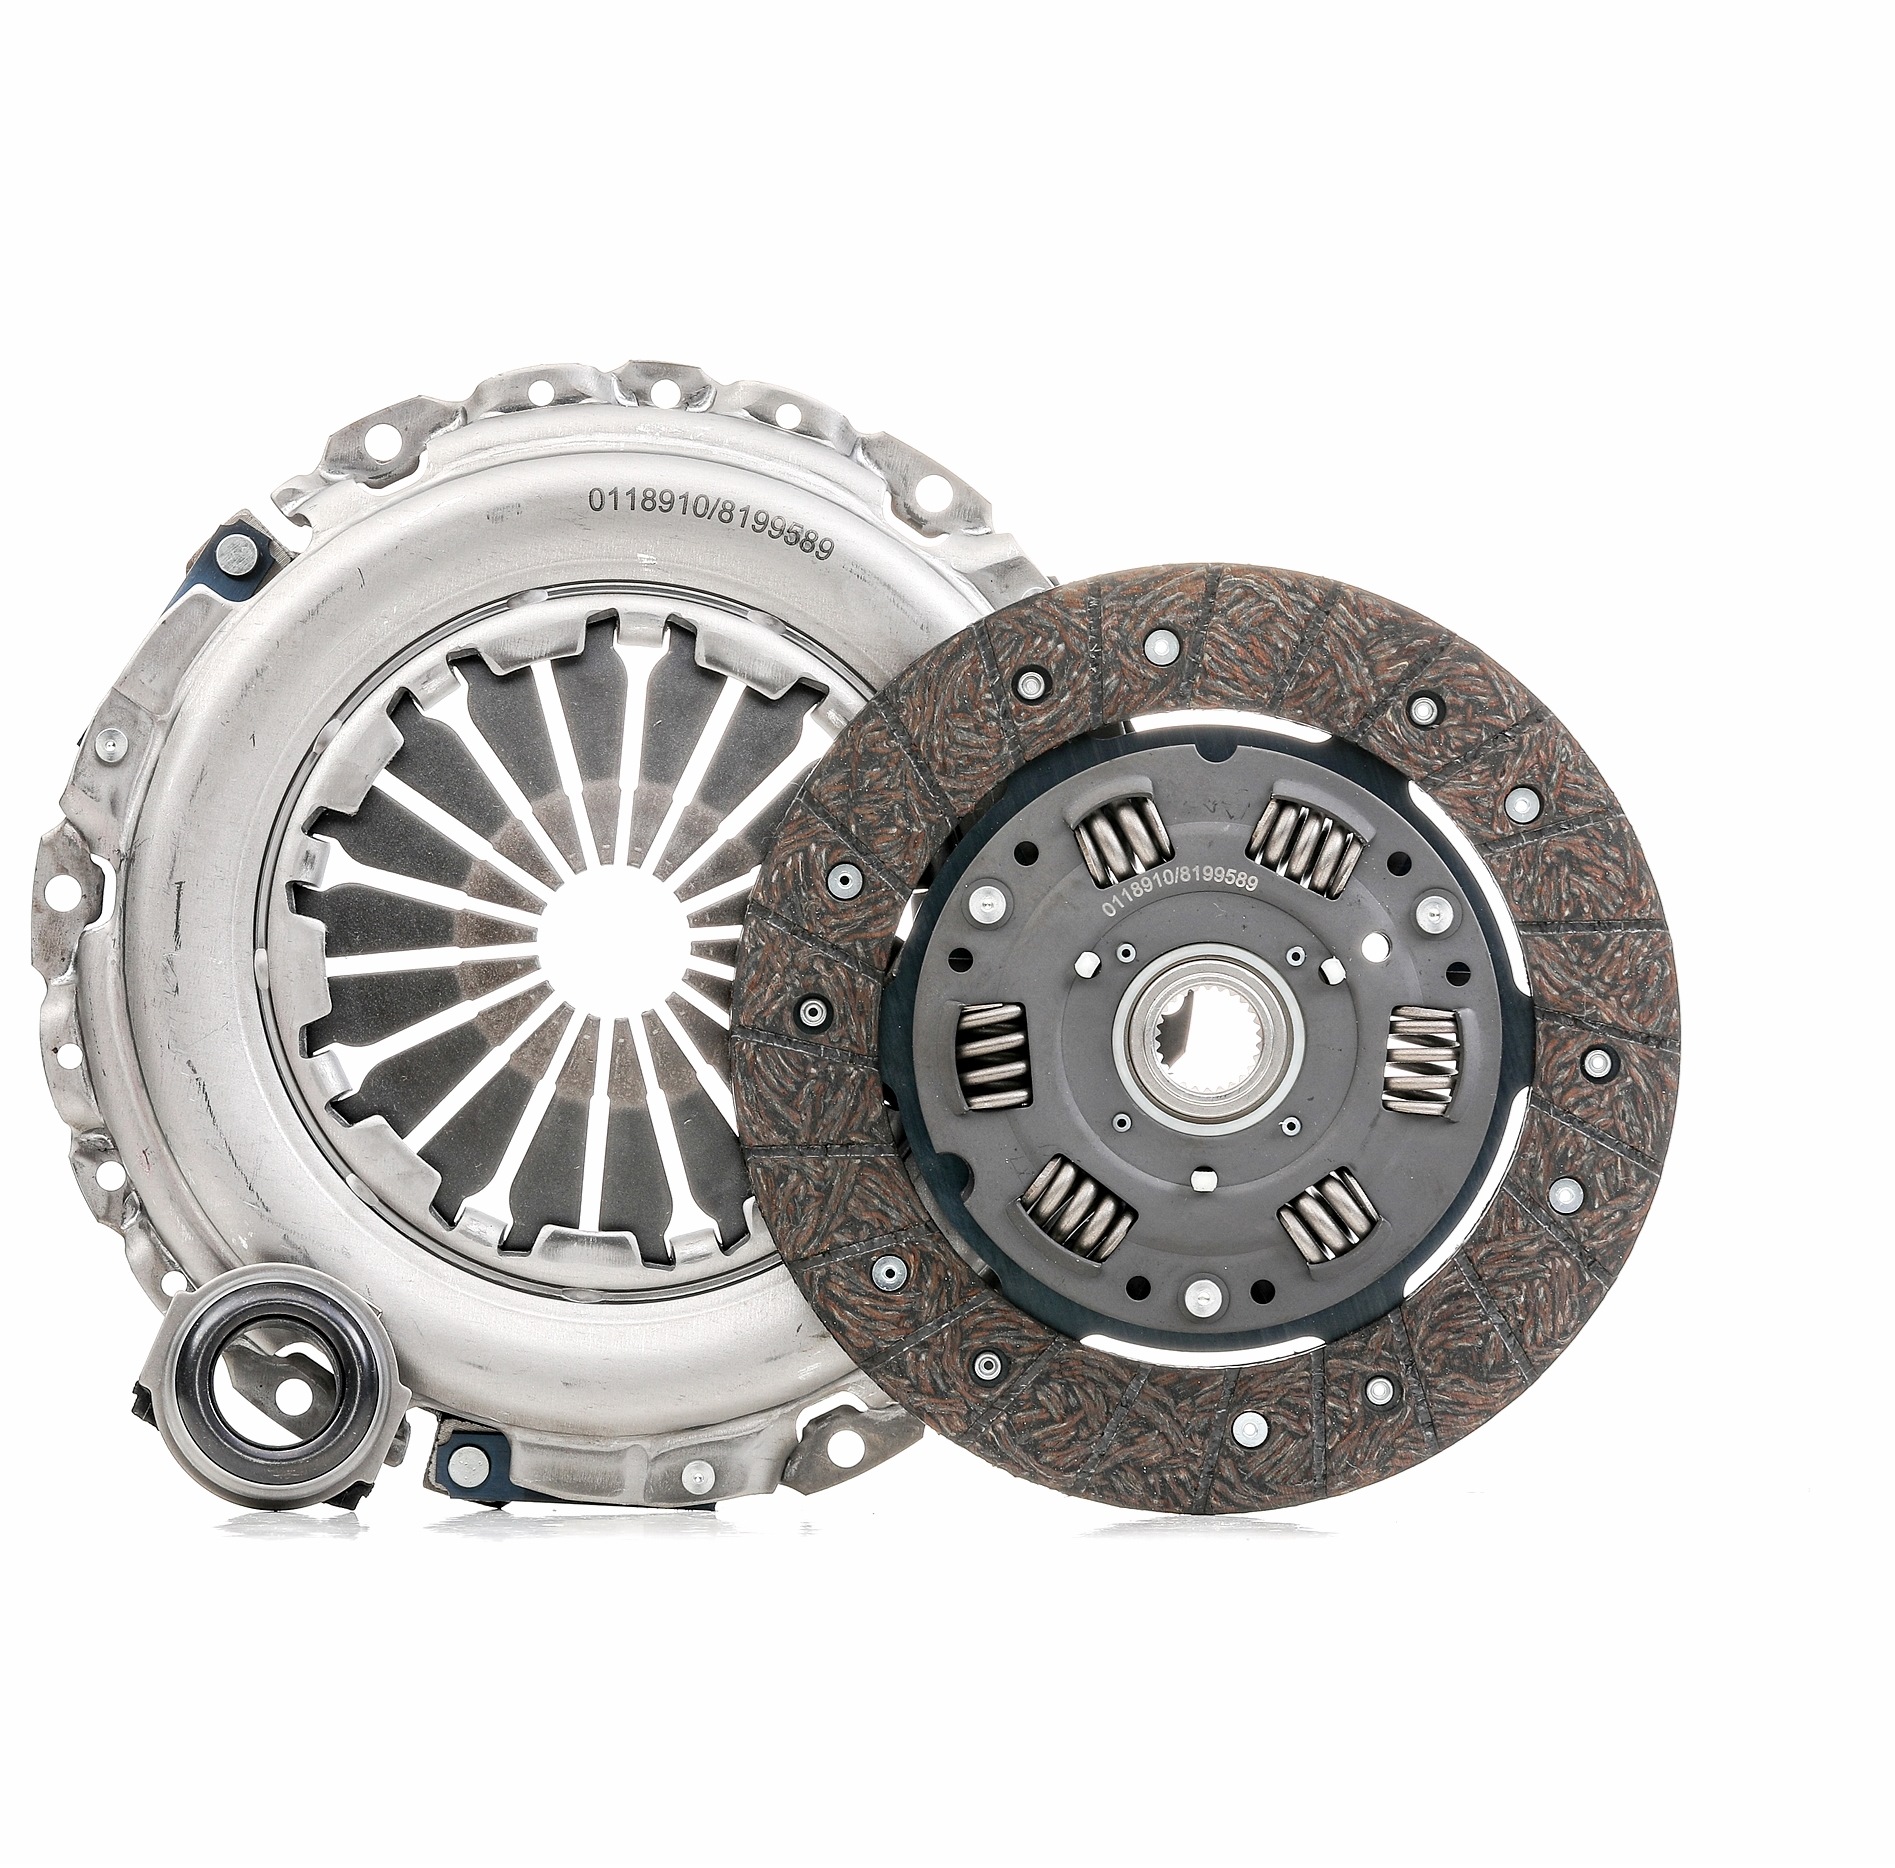 STARK SKCK-0100199 Clutch kit three-piece, with clutch release bearing, with clutch disc, 220mm